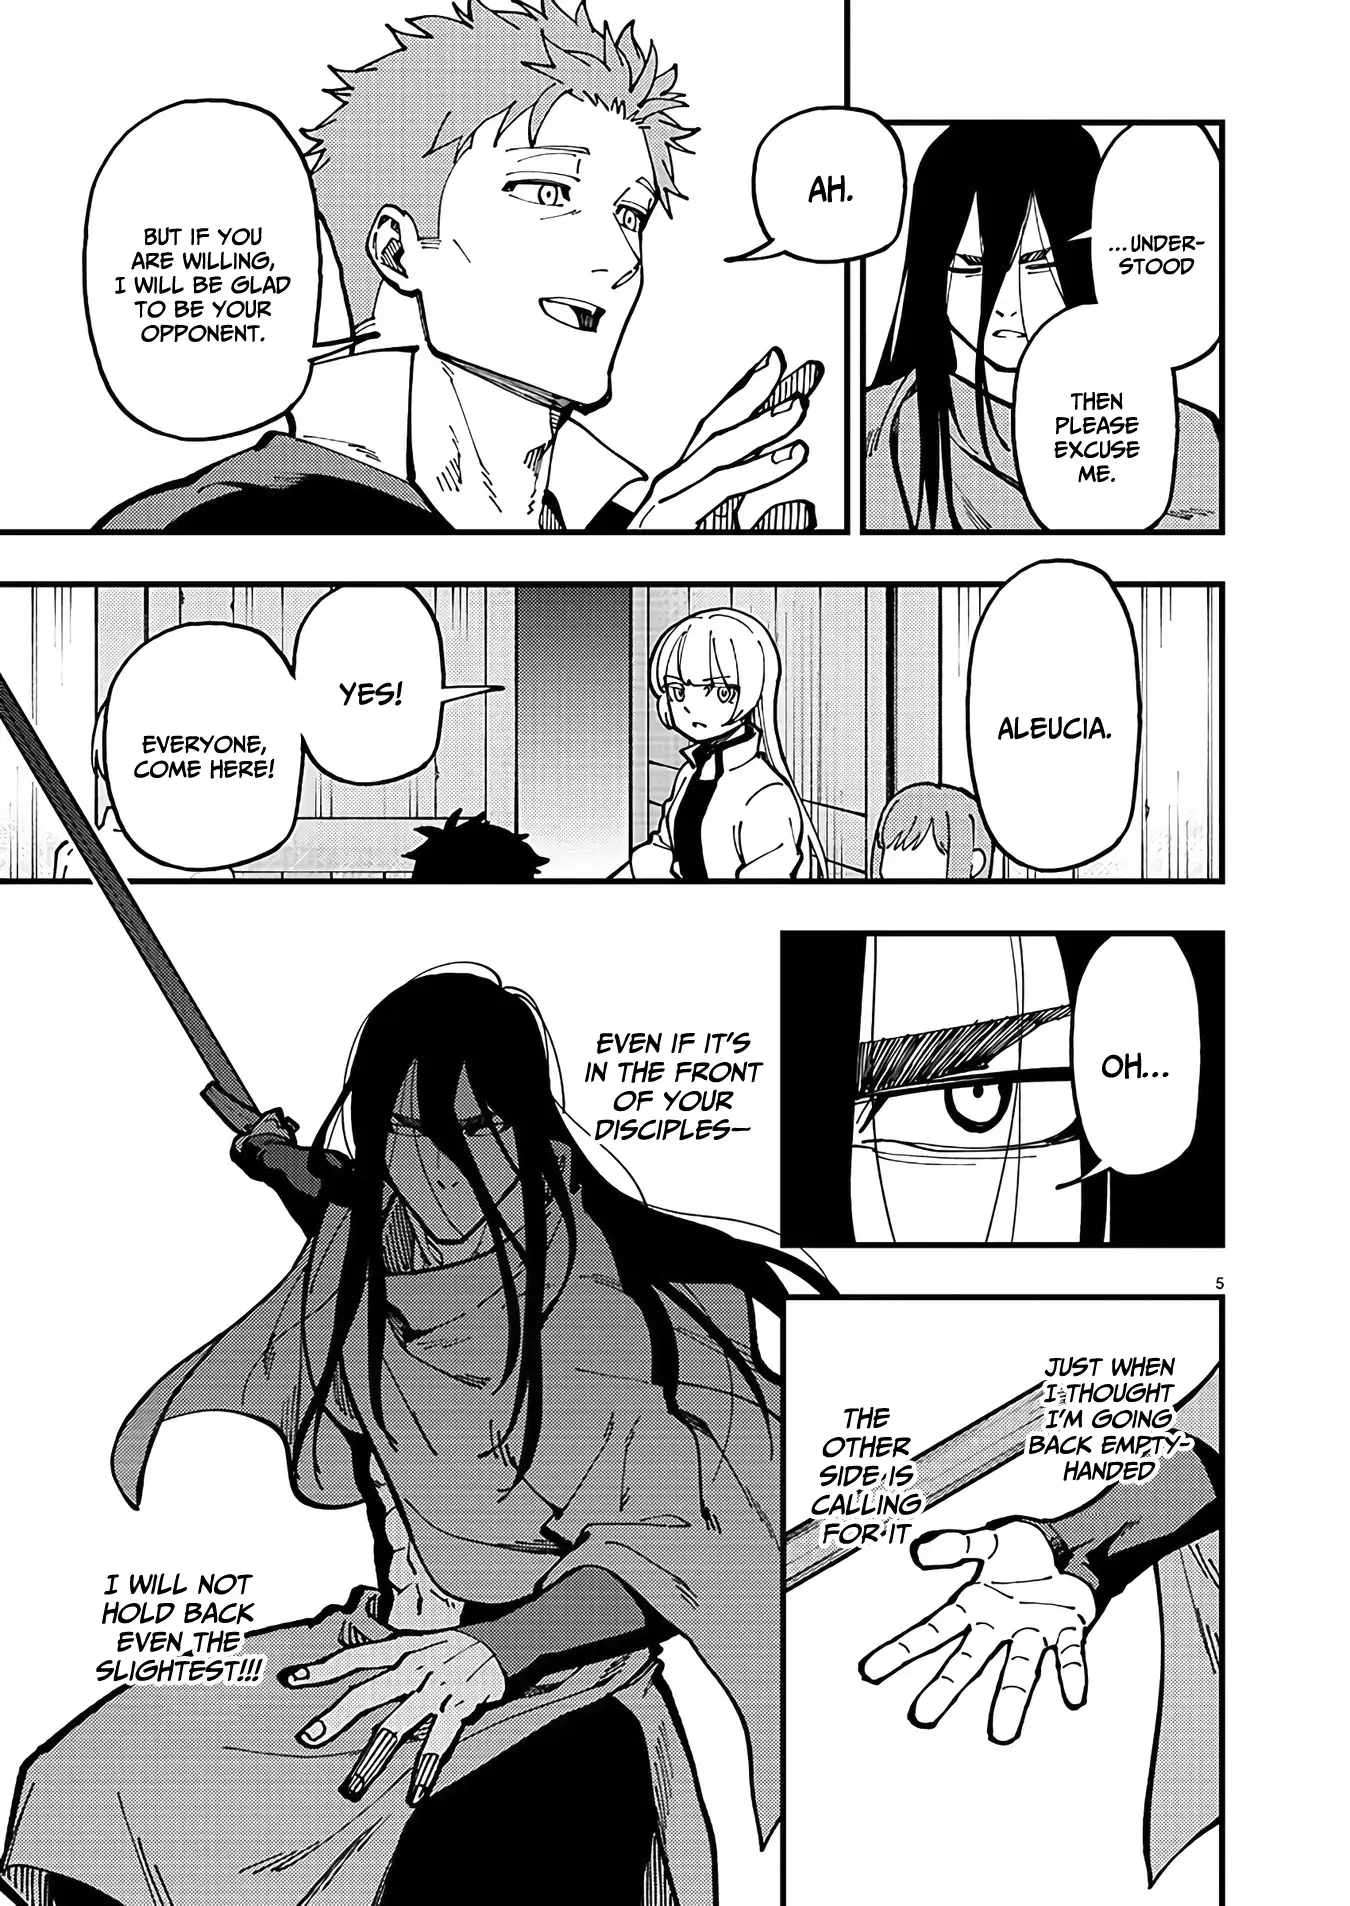 Backwater Old Man Becomes A Swordmaster - chapter 21.5 - #6